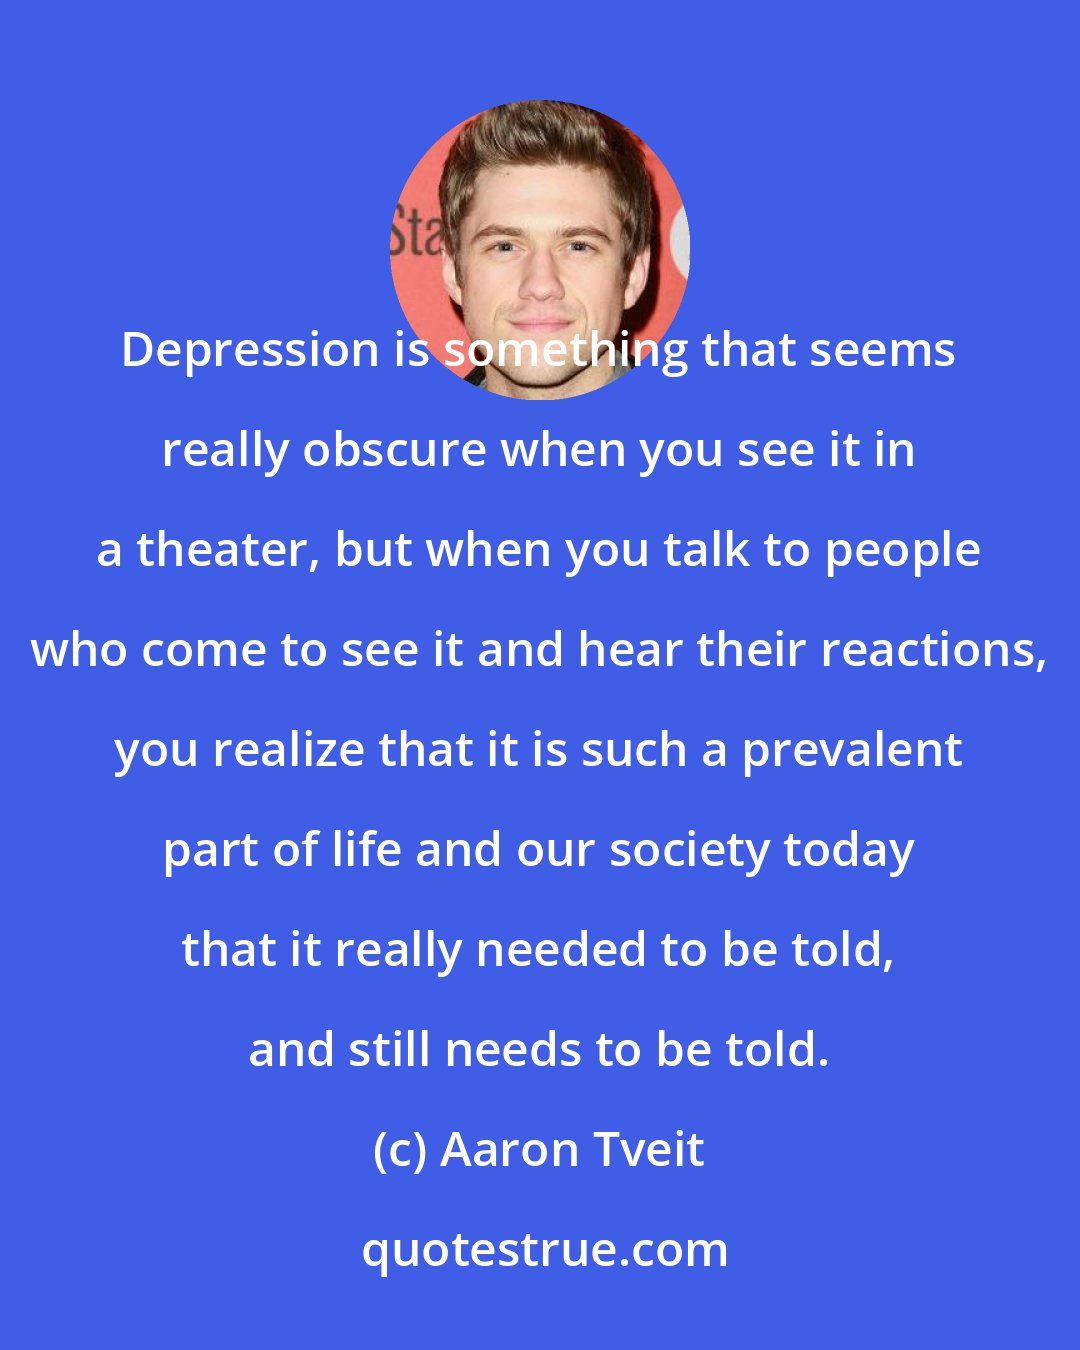 Aaron Tveit: Depression is something that seems really obscure when you see it in a theater, but when you talk to people who come to see it and hear their reactions, you realize that it is such a prevalent part of life and our society today that it really needed to be told, and still needs to be told.